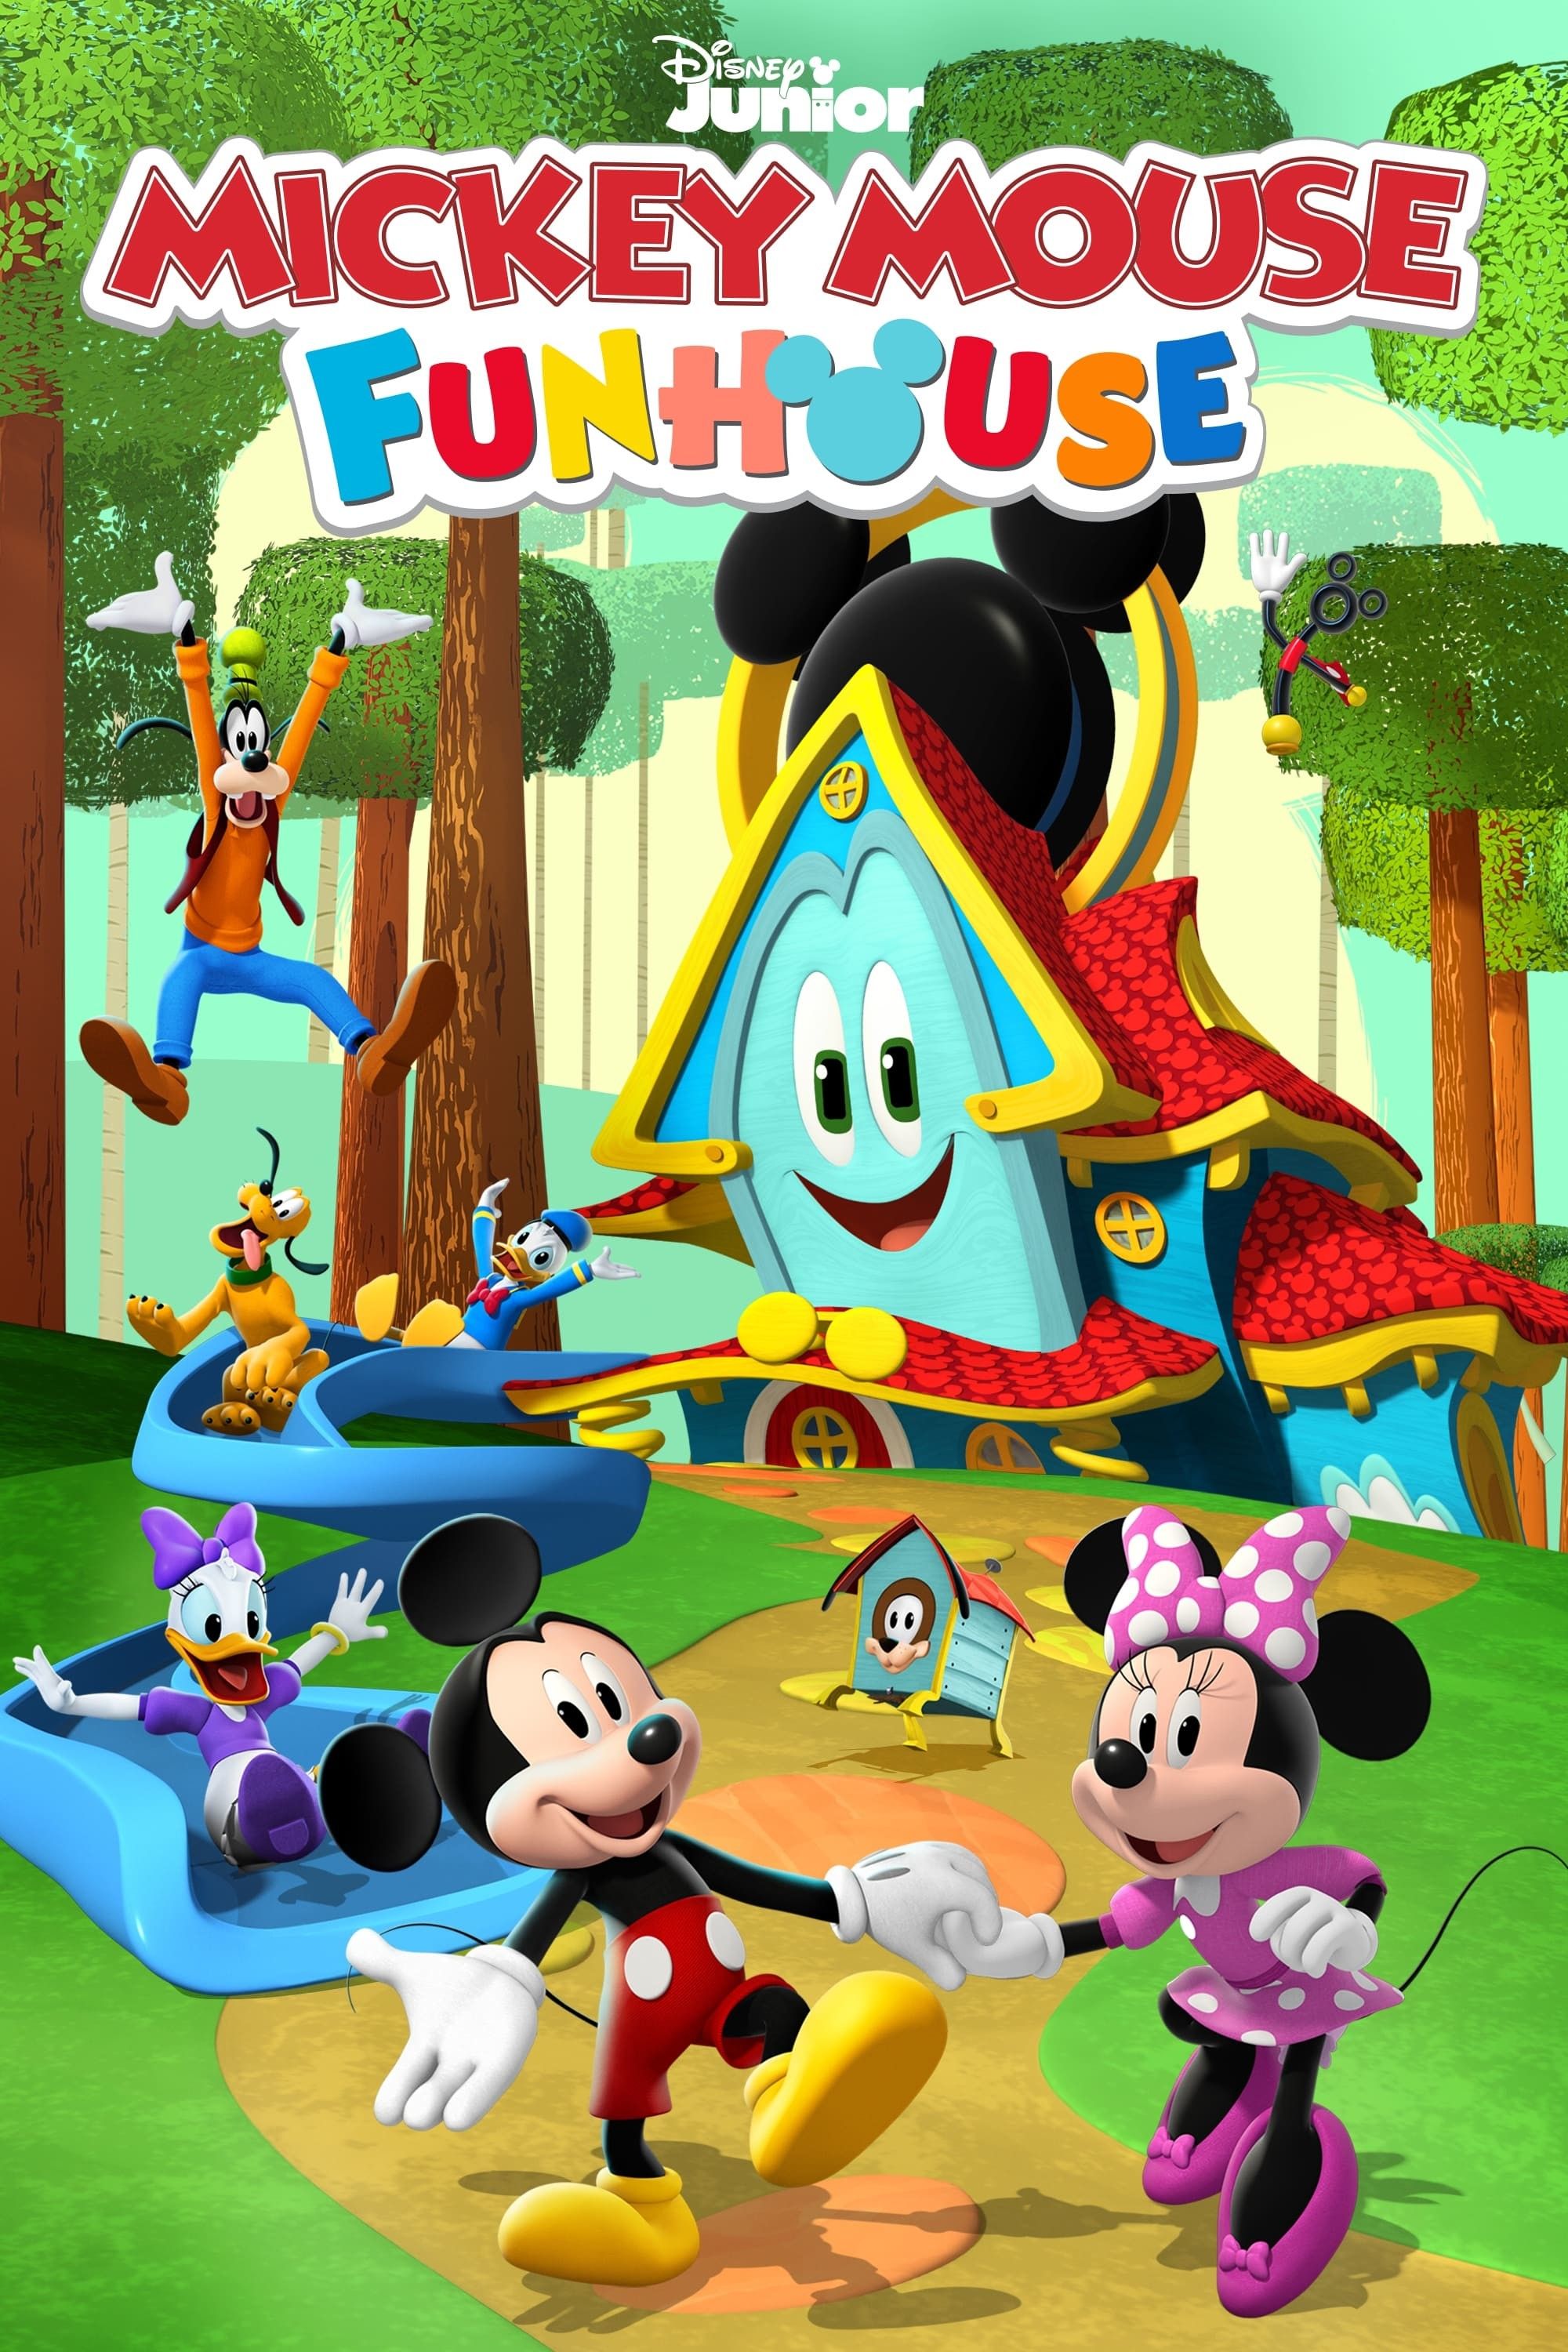 Mickey Mouse Funhouse TV Show Information & Trailers